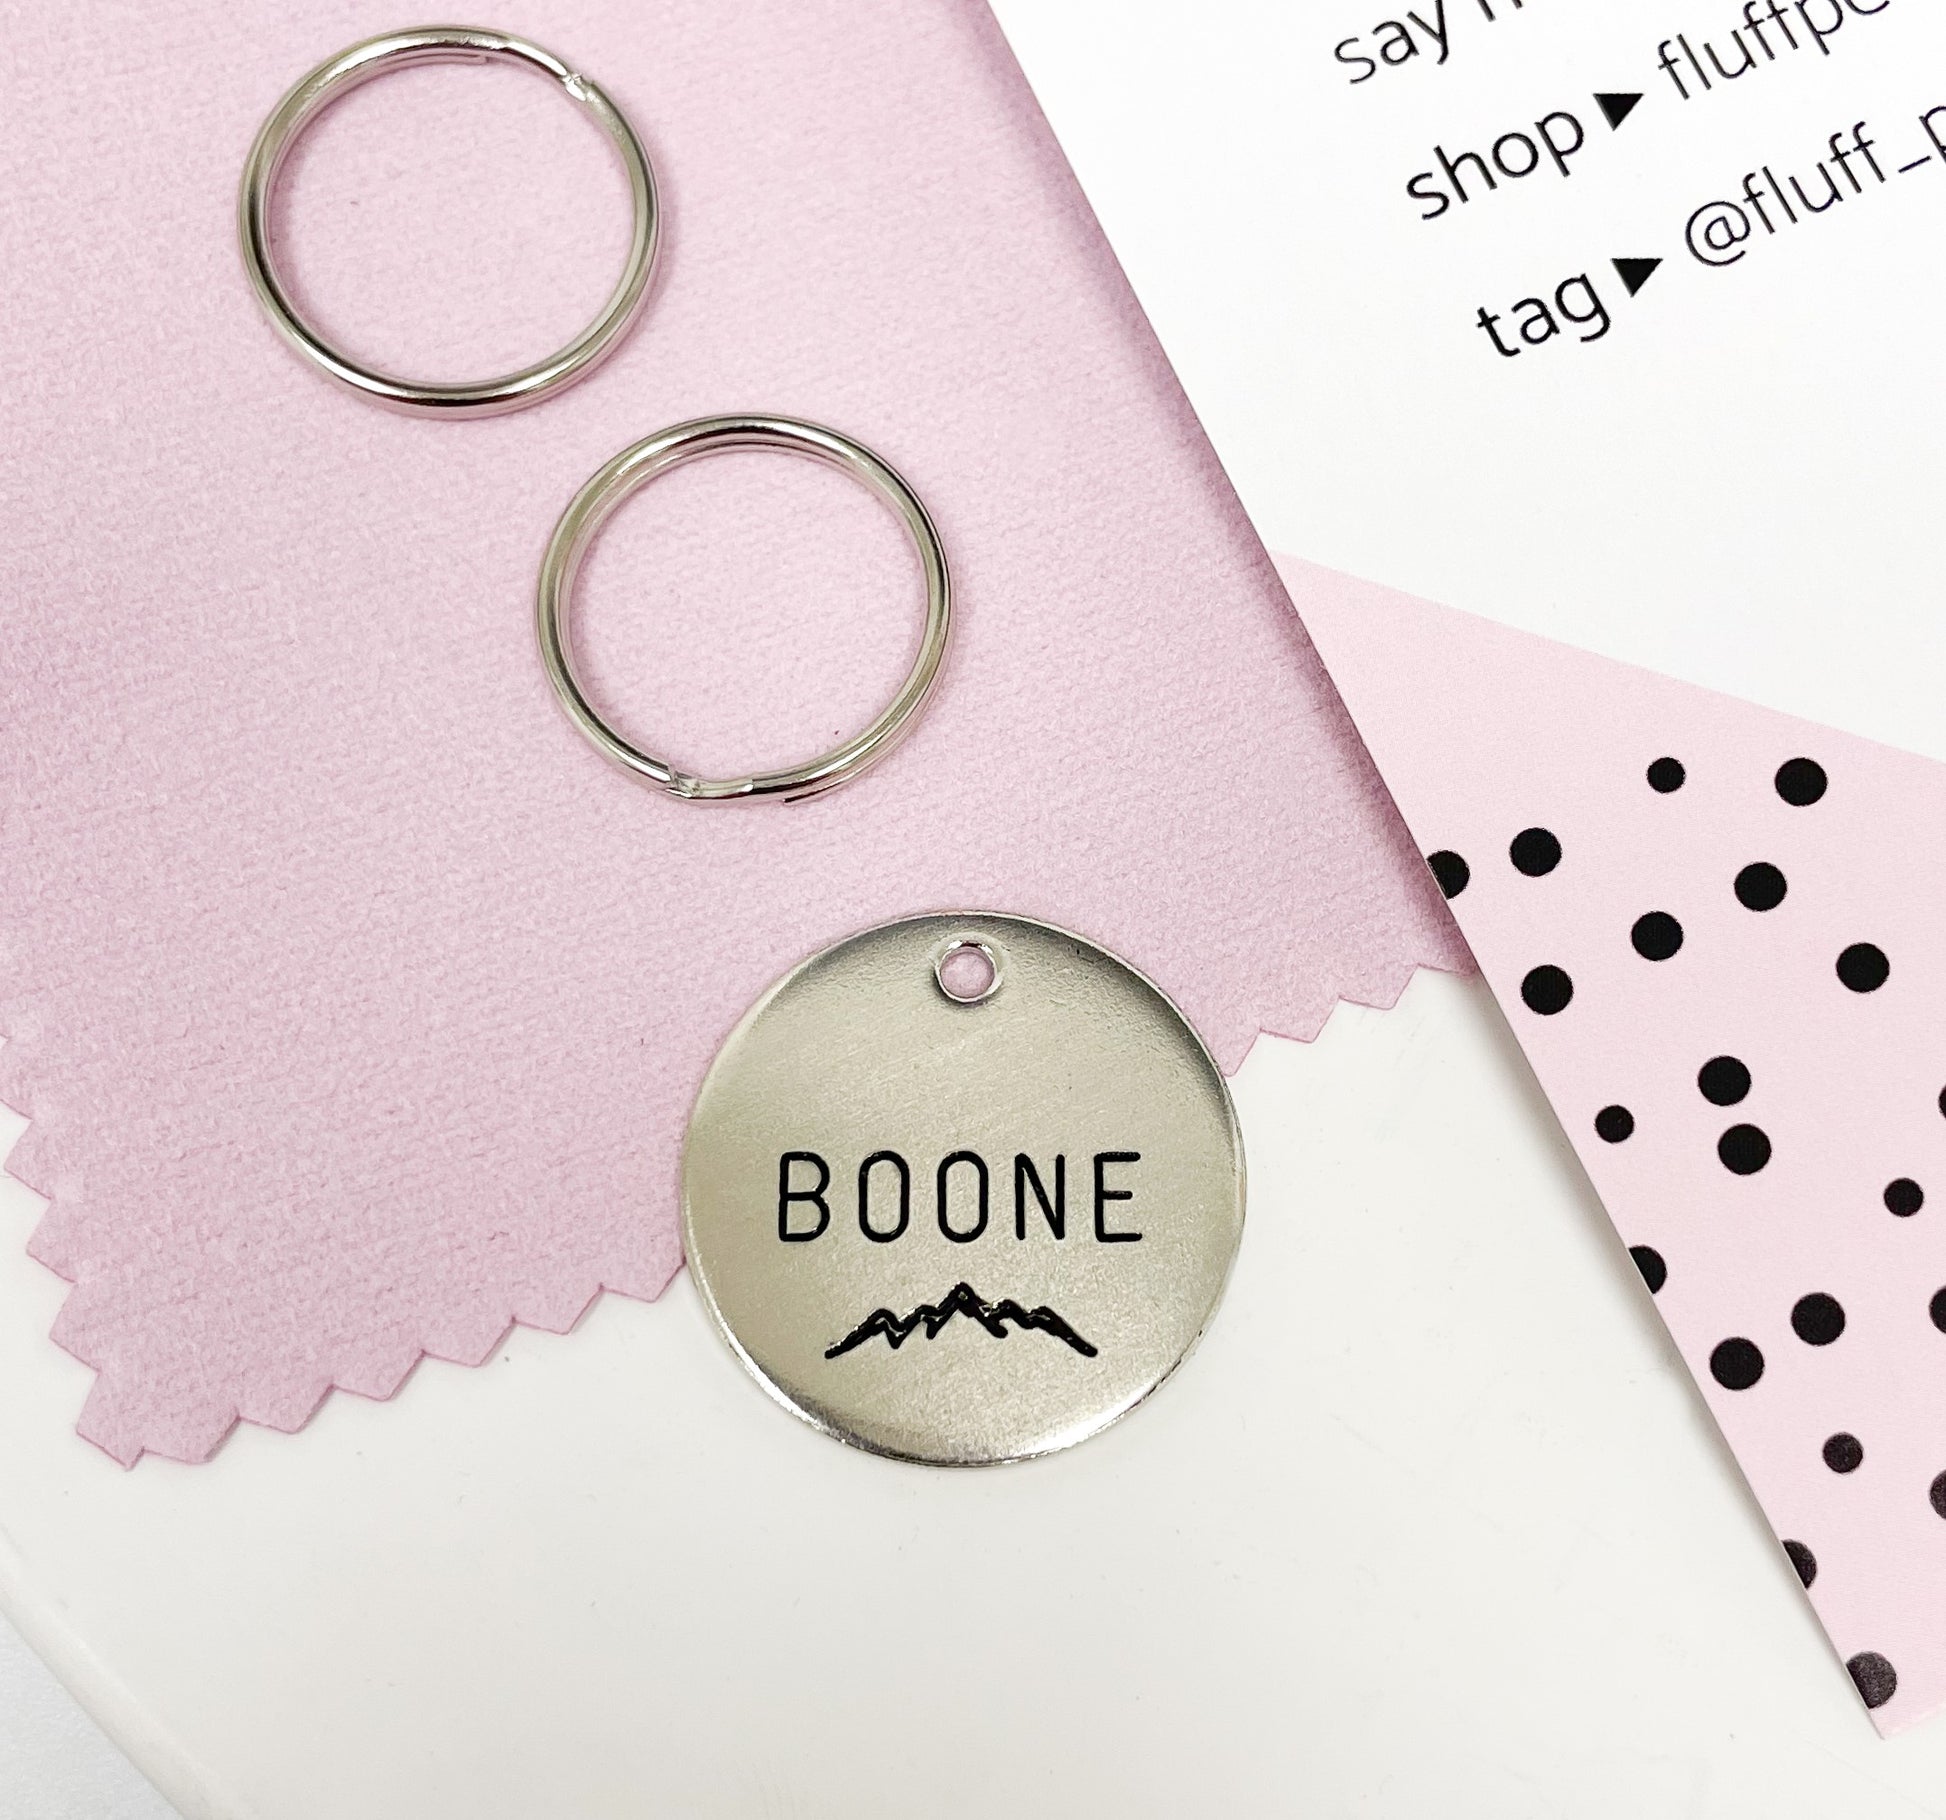 Personalized Dog Tag - Mountains Design Engraved Dog Tag - Simple Mountains Design Tag - Cat ID Tag - Dog Collar Tag - Custom Dog Tag - Personalized Tag - Pet ID Tag - Pet Name Tag - Nature Themed Dog Tag 